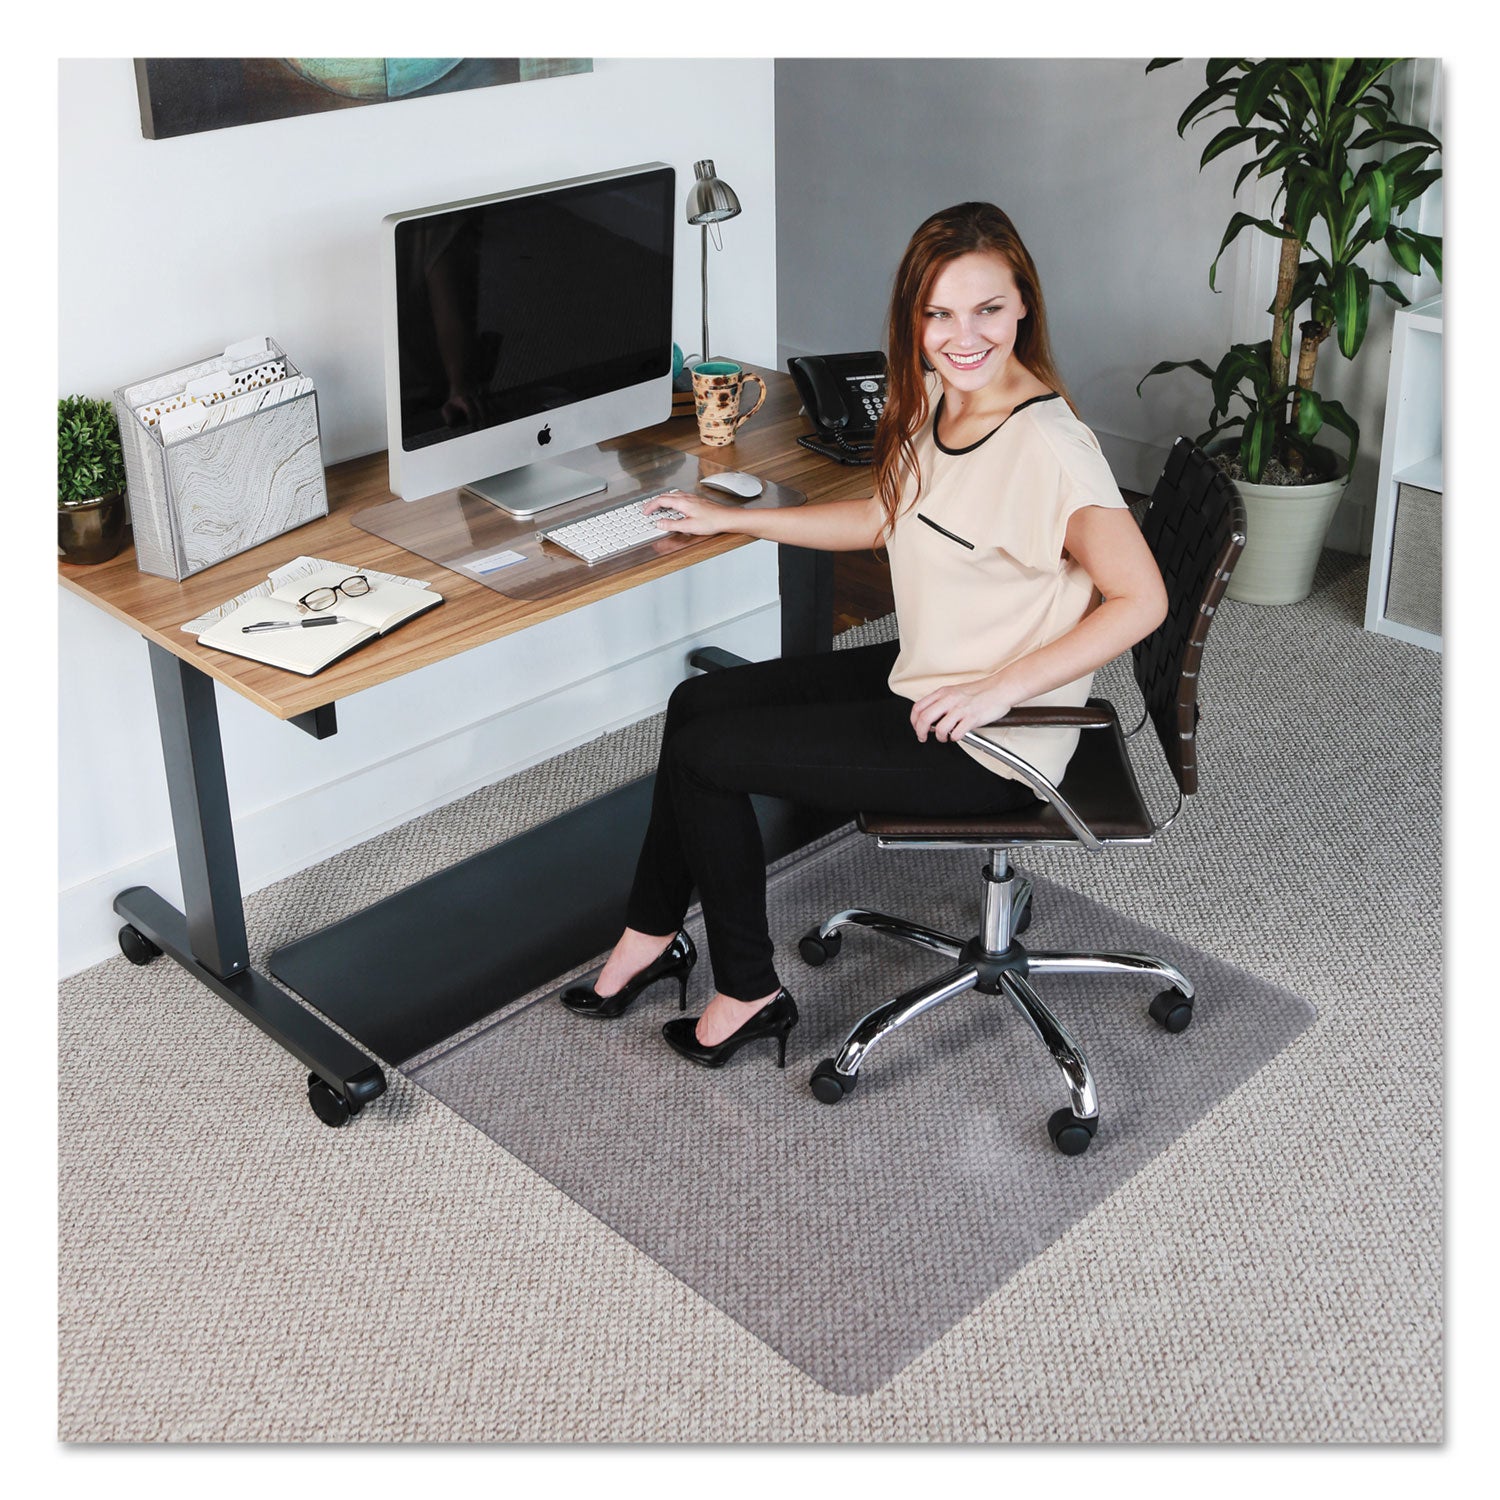 sit-or-stand-mat-for-carpet-or-hard-floors-45-x-53-clear-black_esr184603 - 2